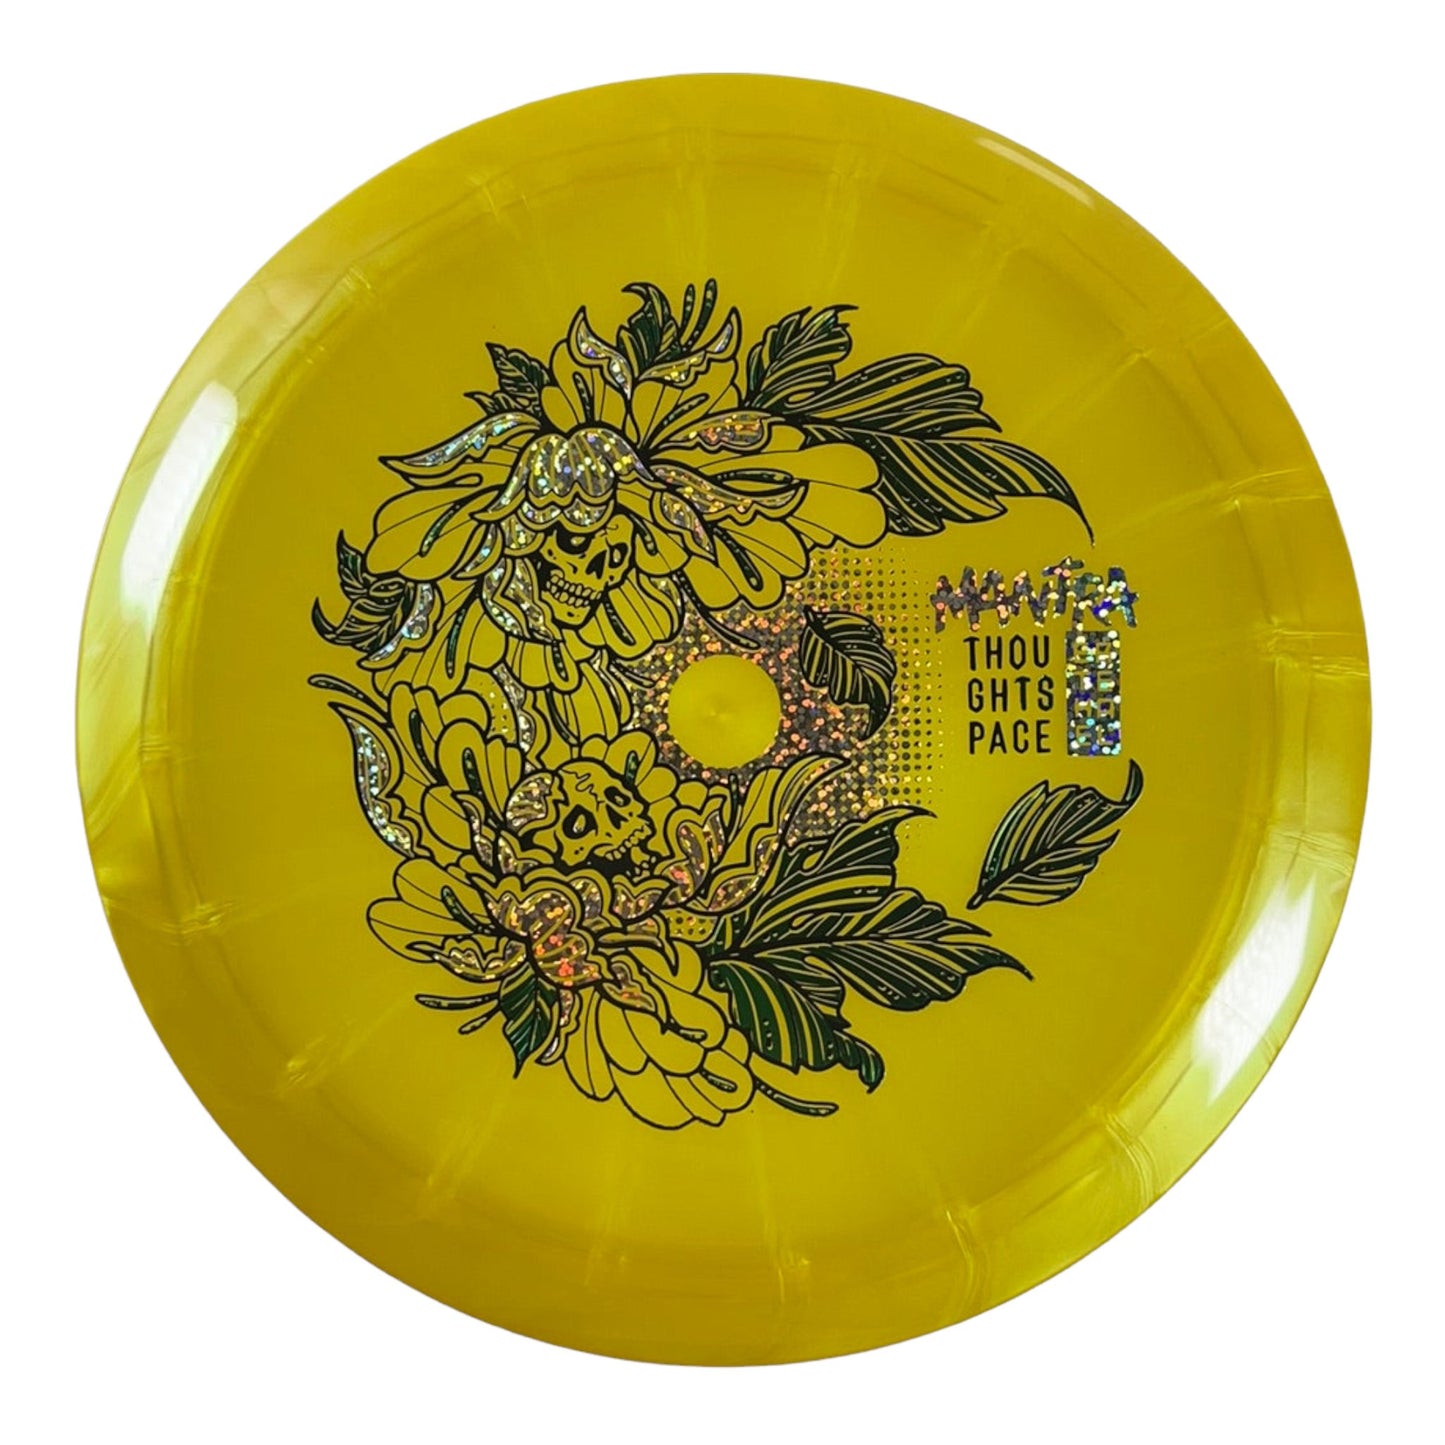 Thought Space Athletics Mantra | Ethereal | Yellow/Green 173g Disc Golf